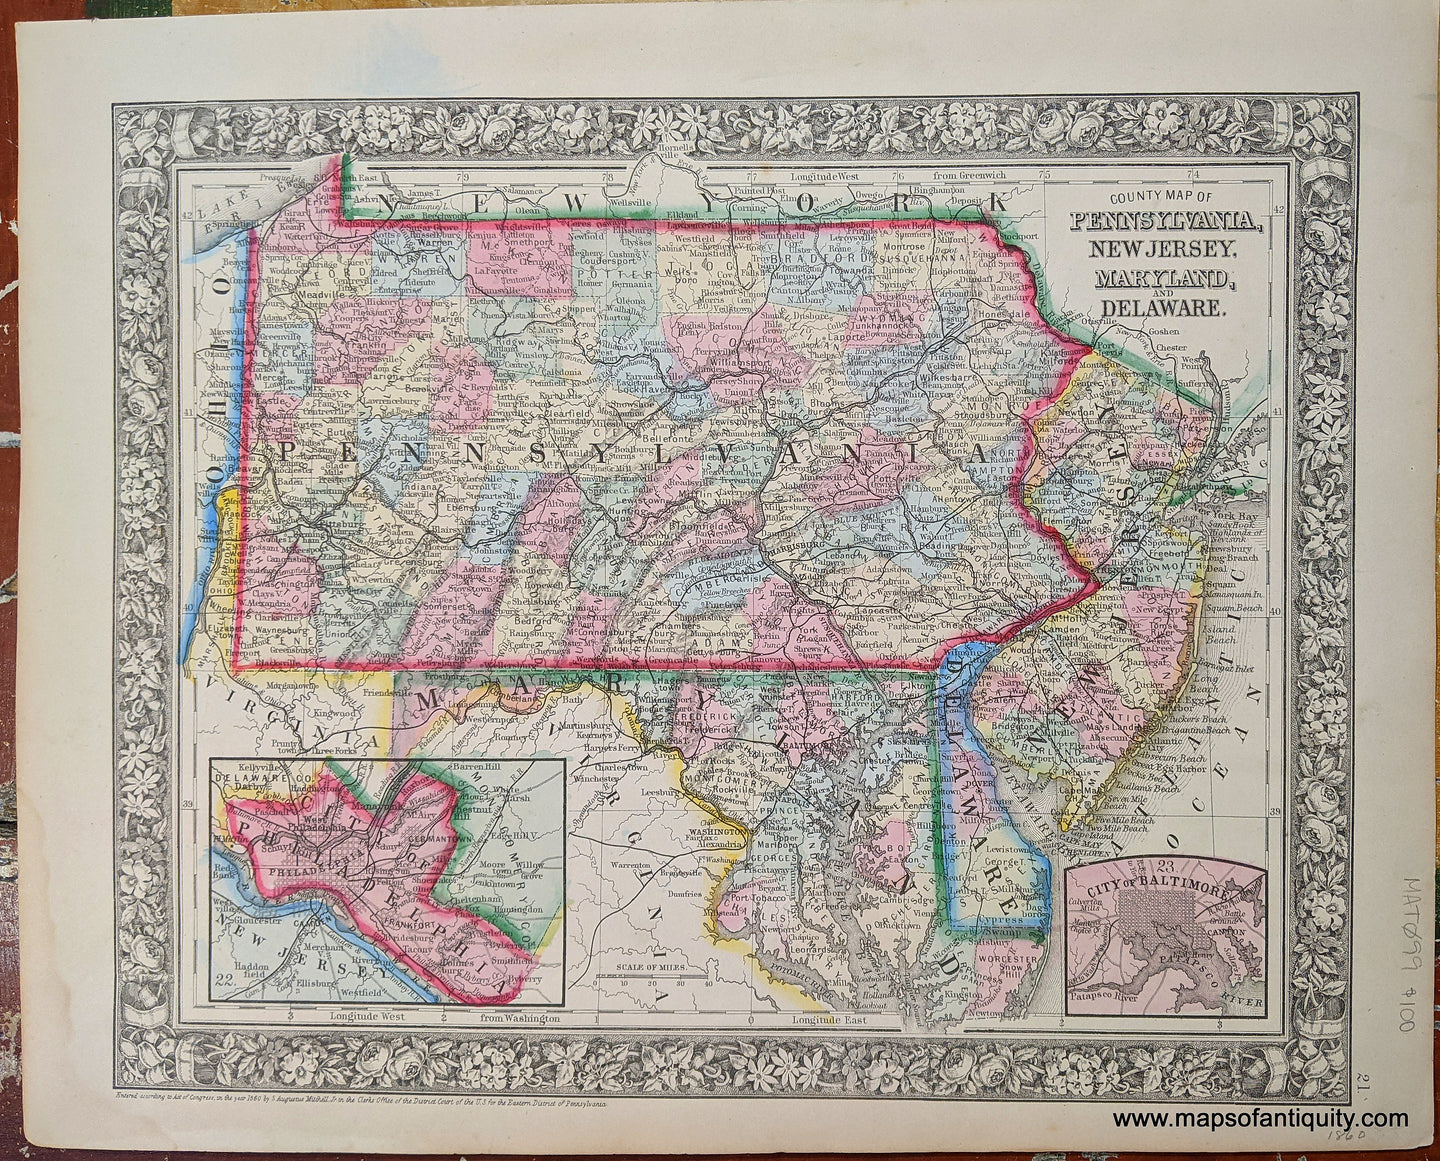 Antique-Hand-Colored-Map-County-Map-of-Pennsylvania-New-Jersey-Maryland-and-Delaware.-United-States-Mid-Atlantic-1860-Mitchell-Maps-Of-Antiquity